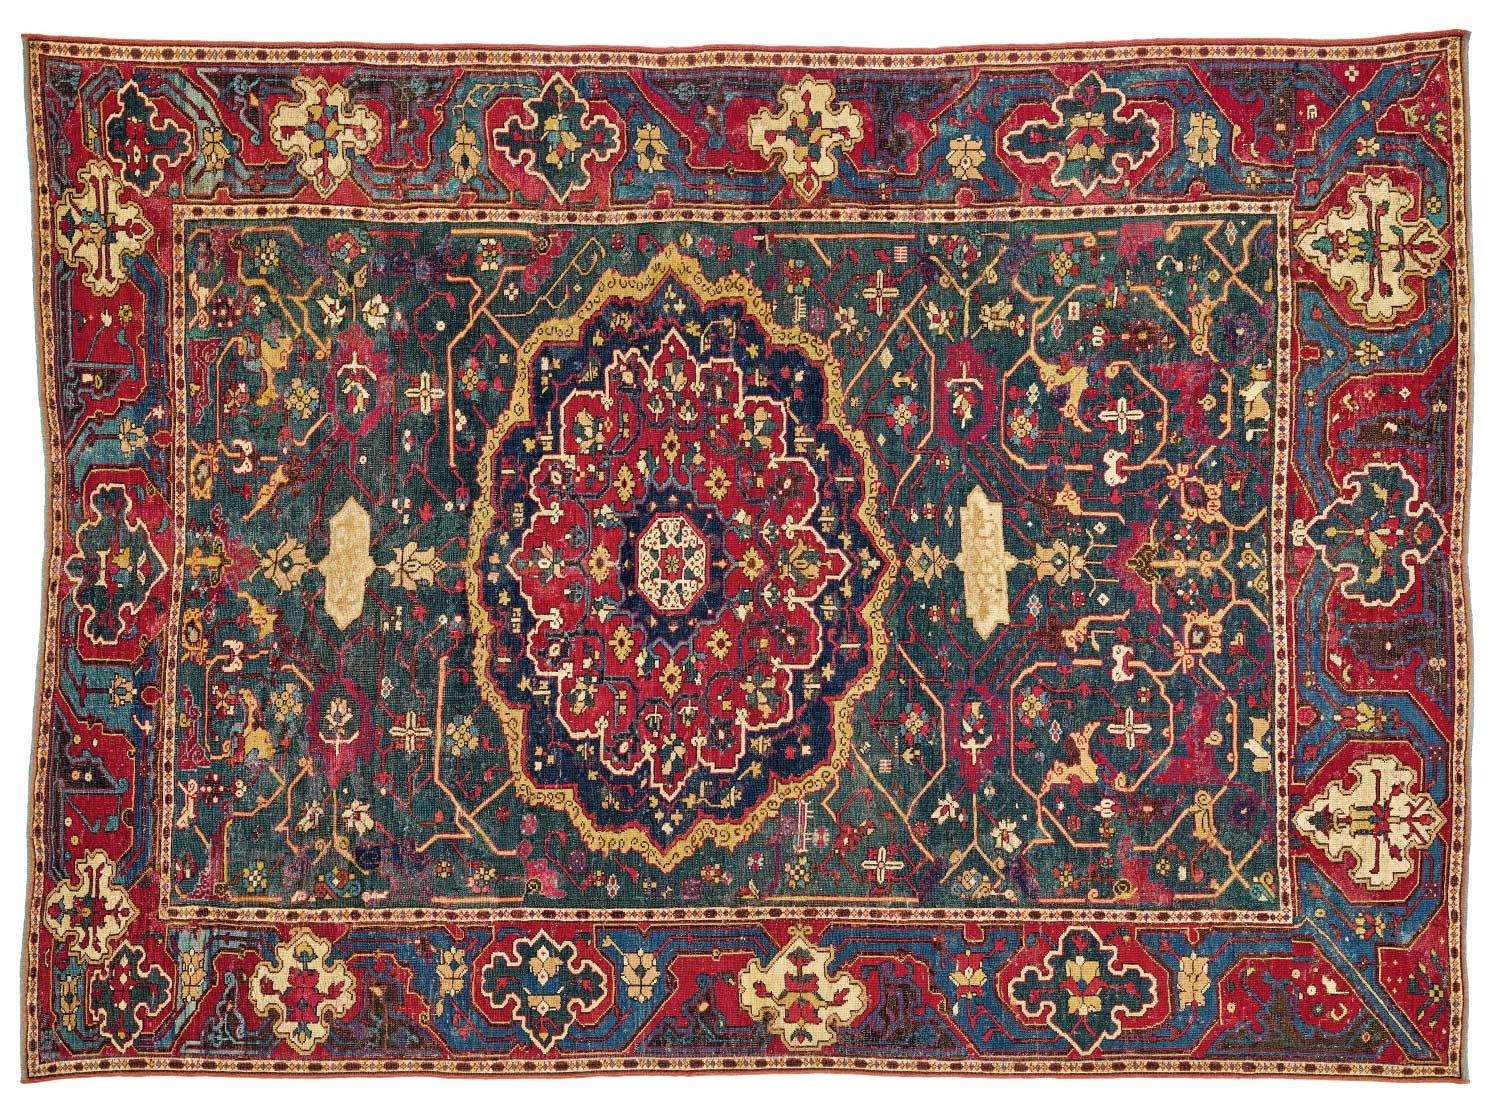 MIA Adds Significant ‘Orient Stars’ to its Textile Collection